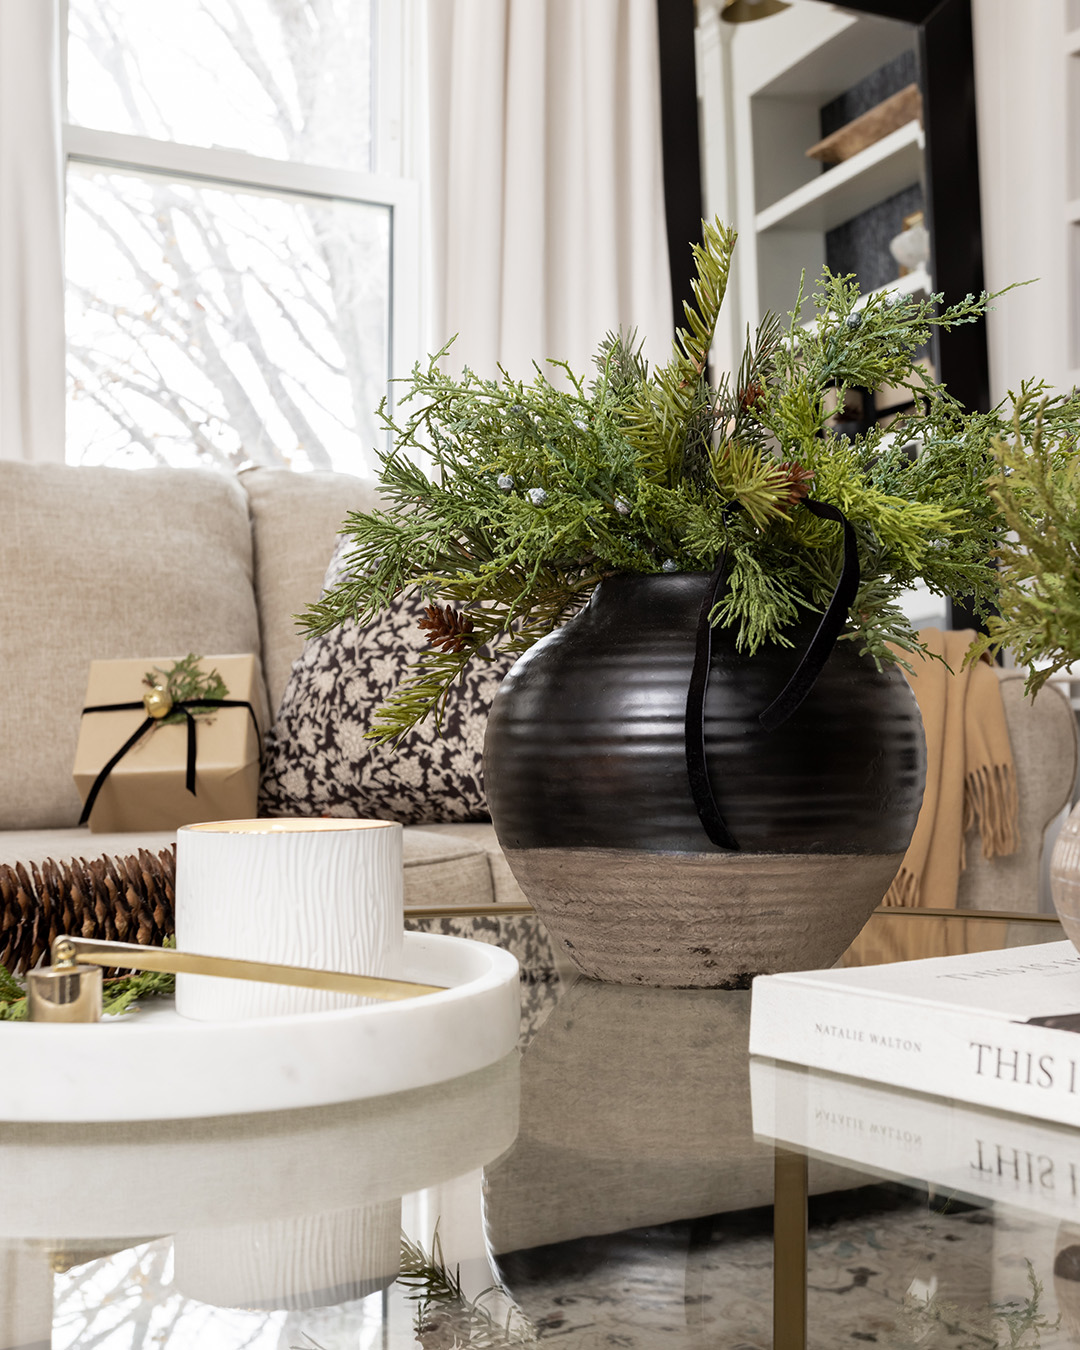 Black vase of Christmas greenery on a glass coffee table.